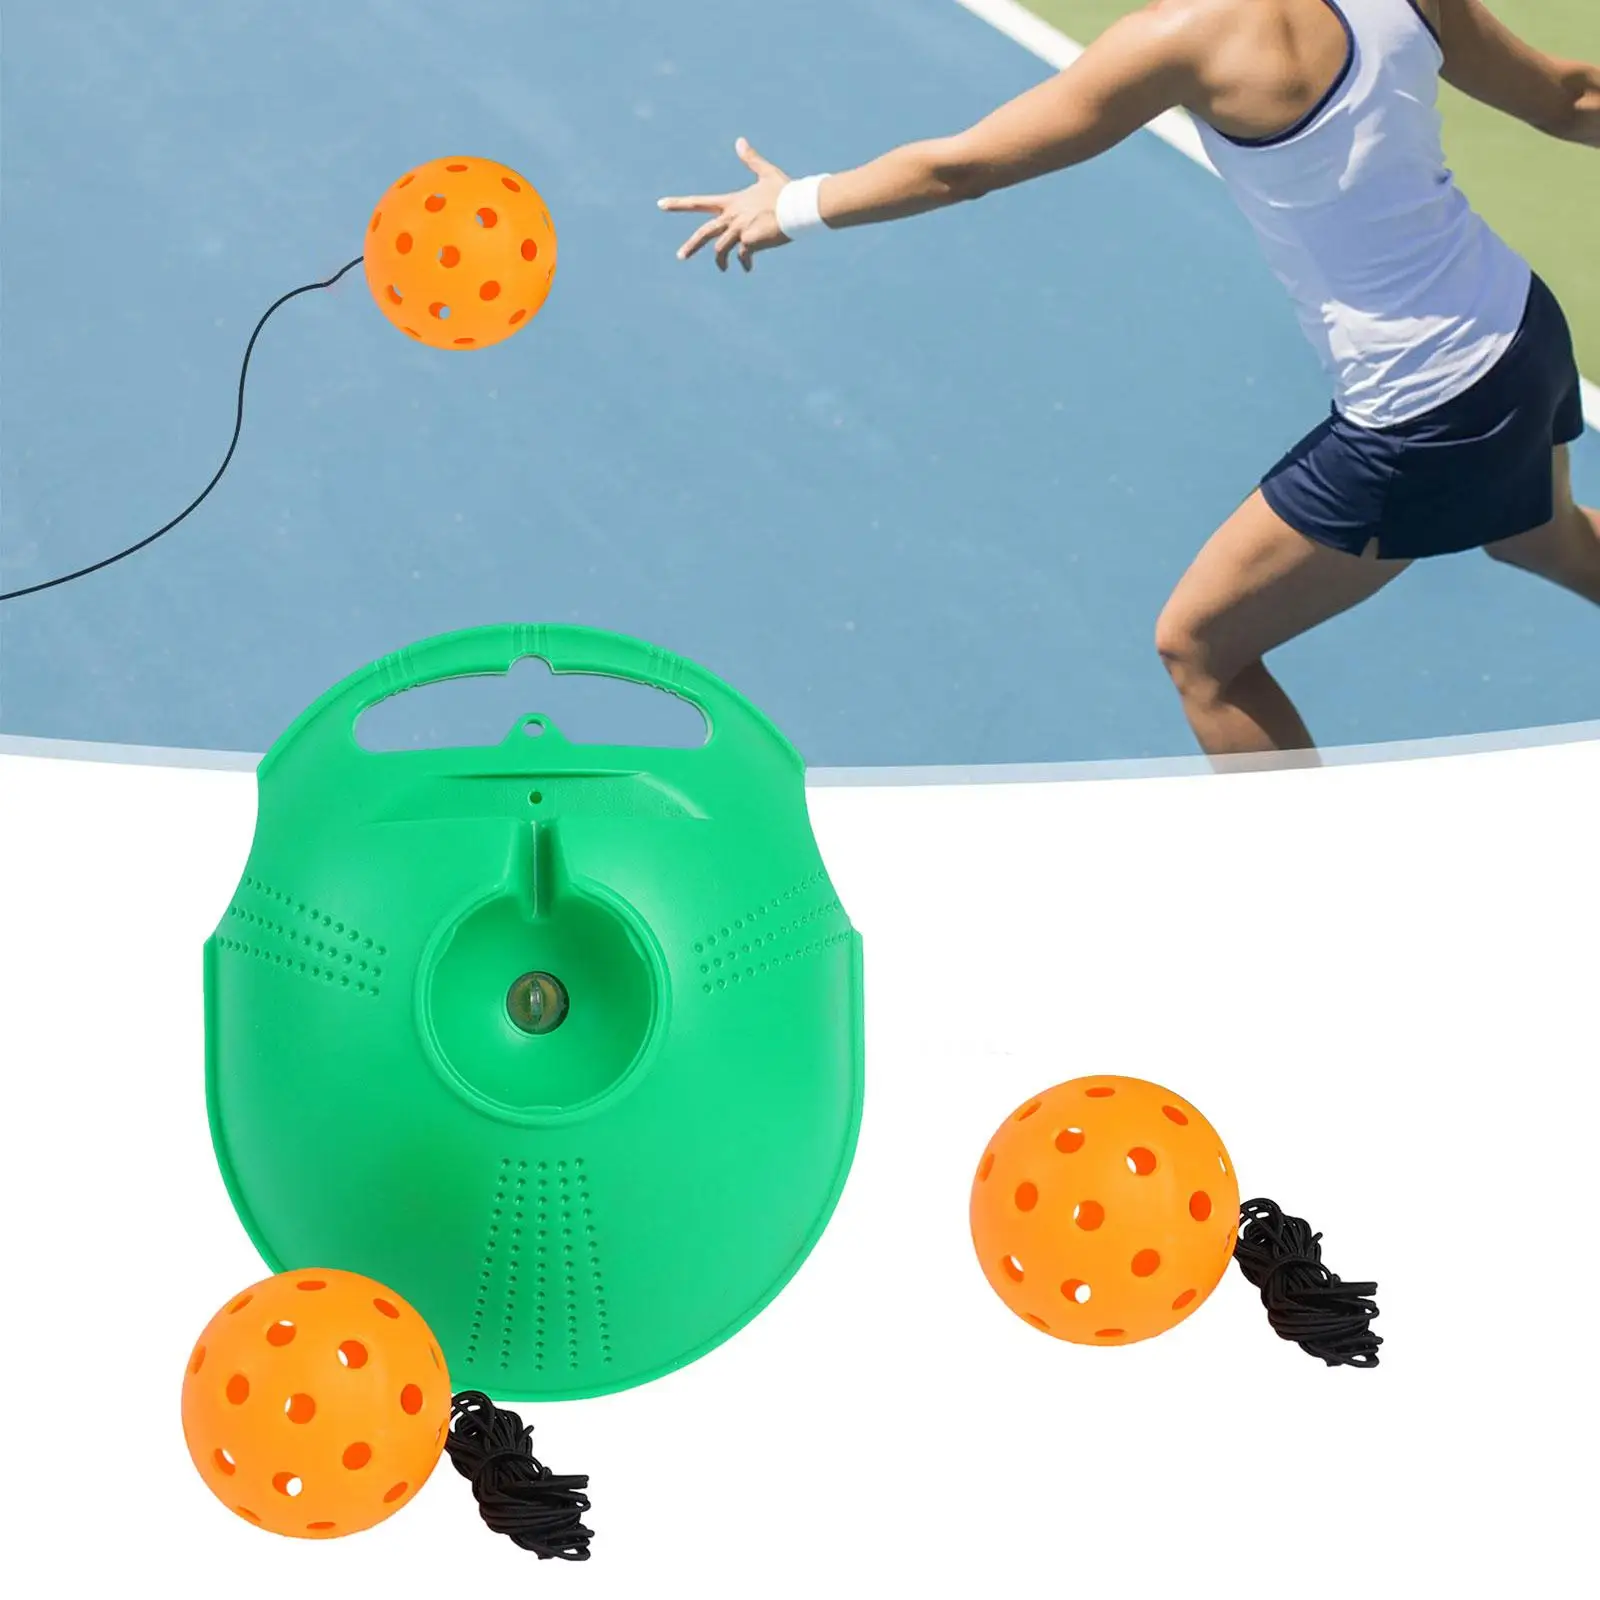 Pickleball Trainer Pickleball Ball with Rope Outdoor Indoor Pickleball Solo Equipment Pickleball Training Tool for Training